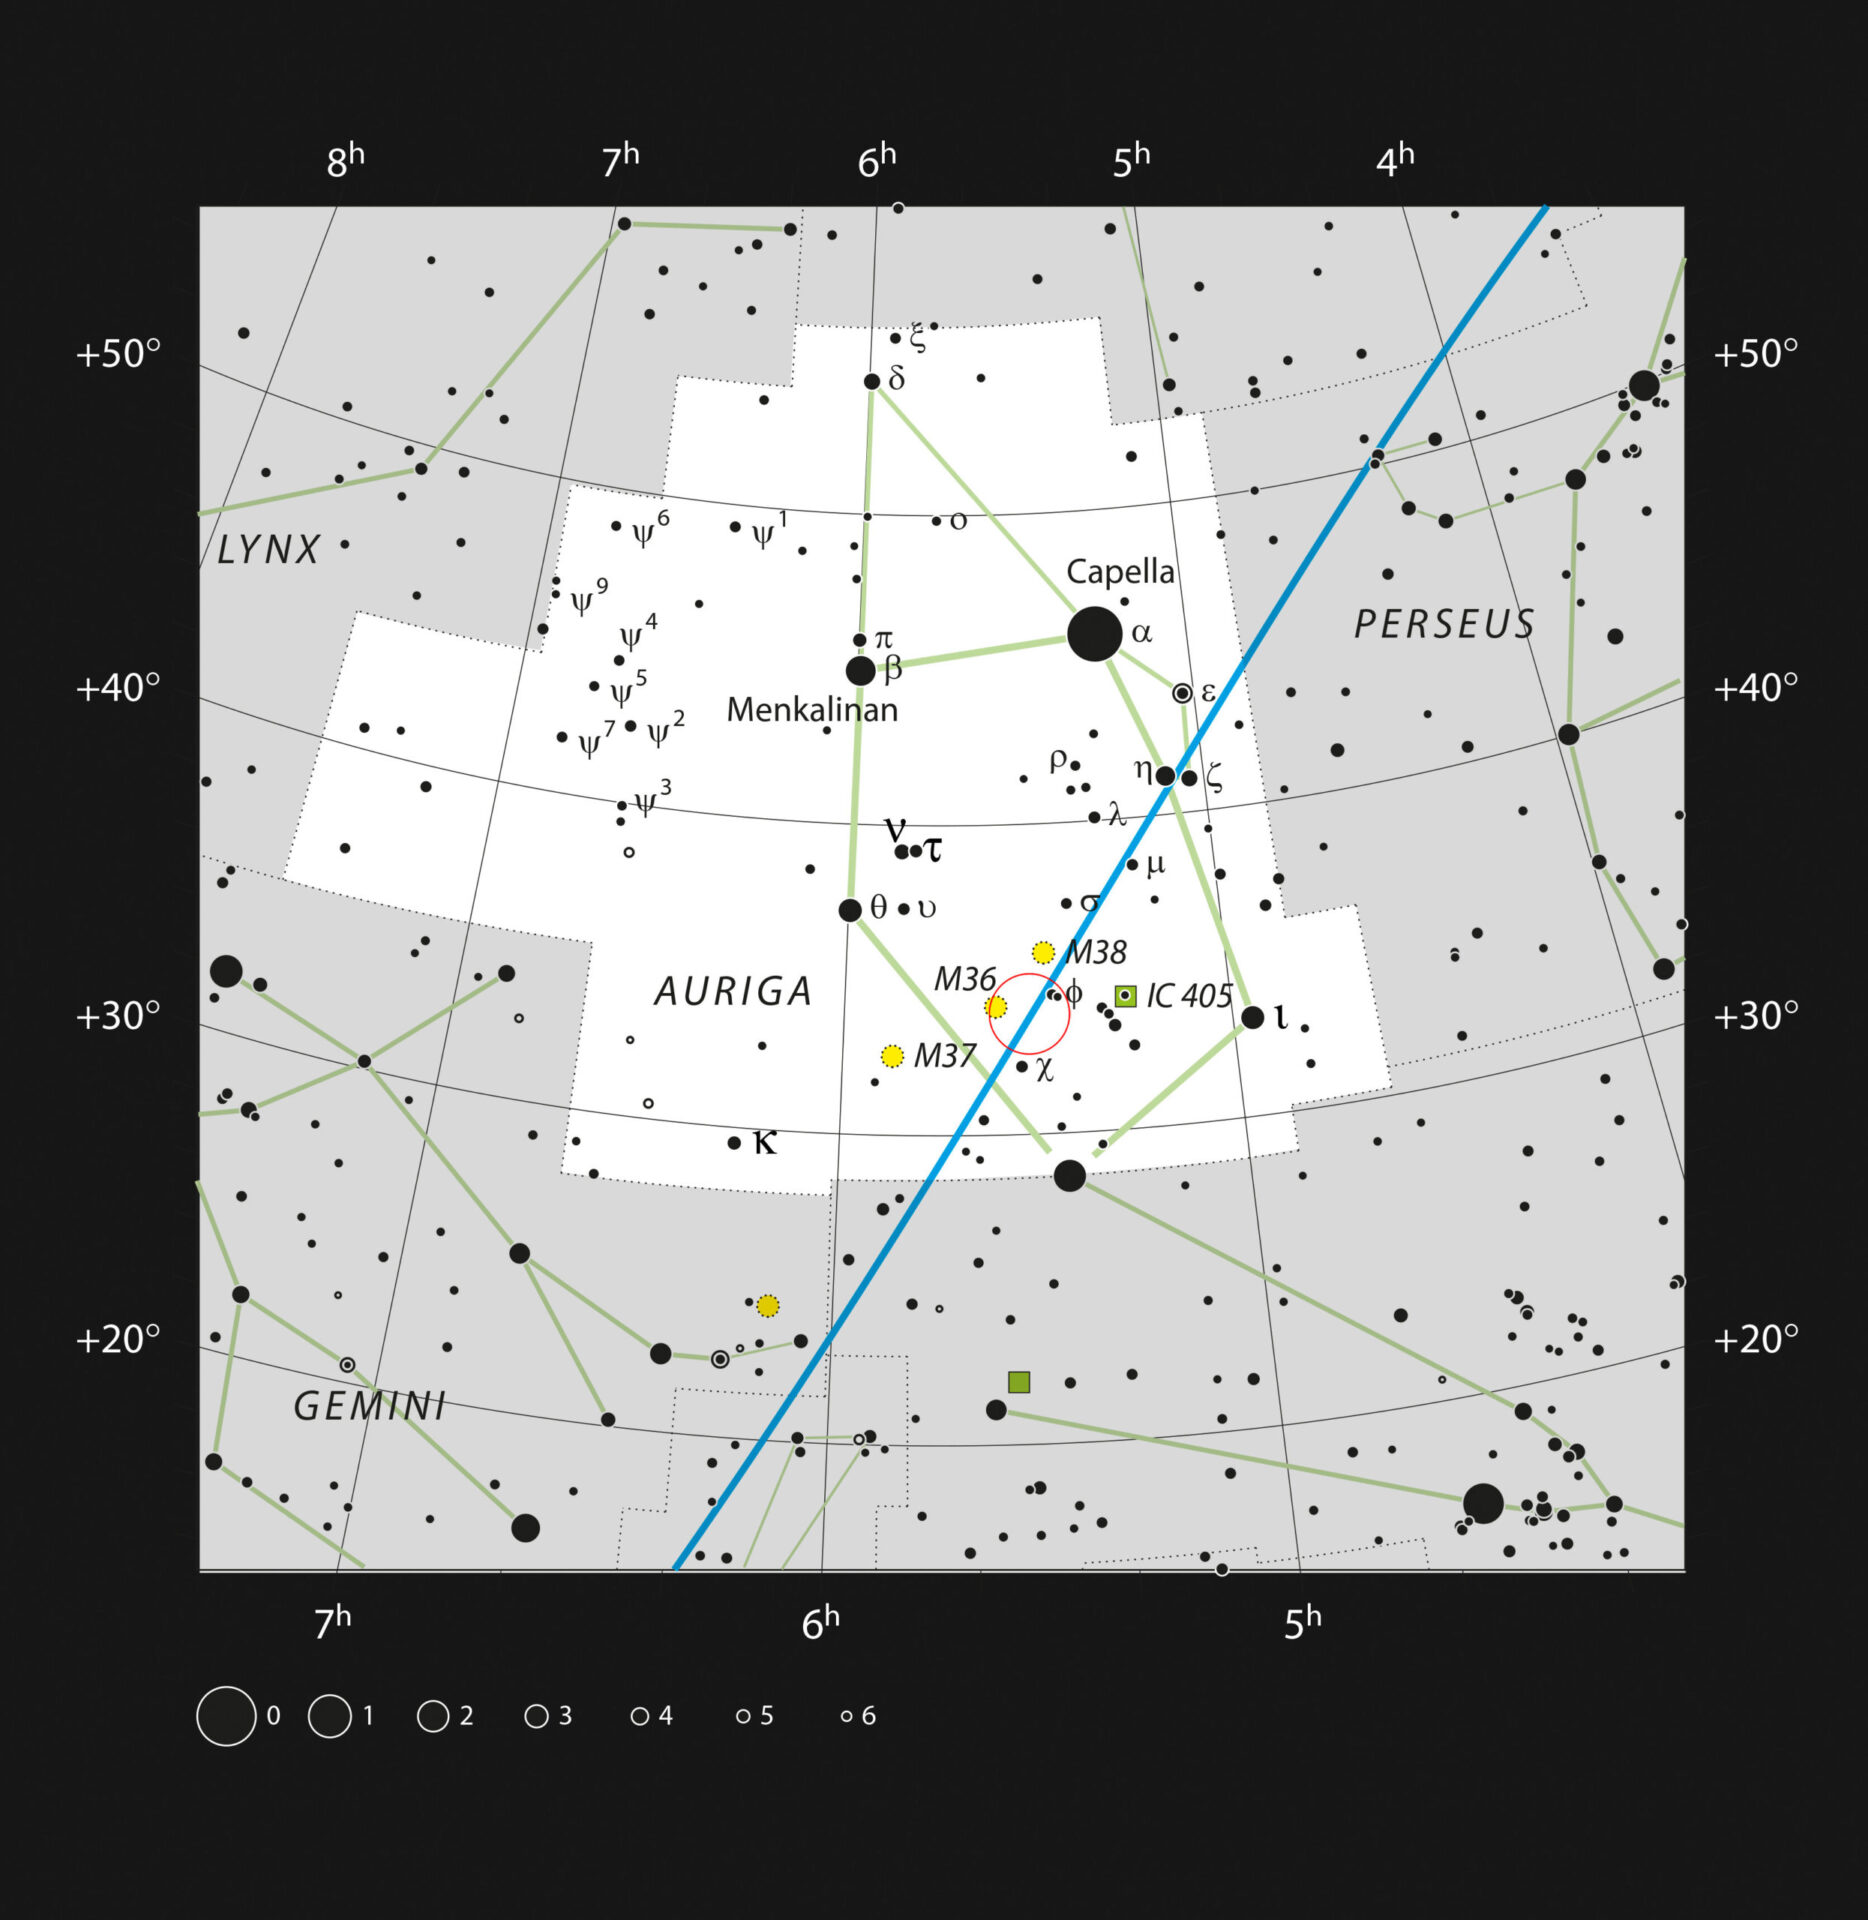 This chart shows the location of the star-forming region AFGL 5142, recently observed with ALMA, in the constellation of Auriga. The map shows most of the stars visible to the unaided eye under good conditions, and AFGL 5142 itself is highlighted with a red circle on the image. Credit: ESO, IAU and Sky & Telescope